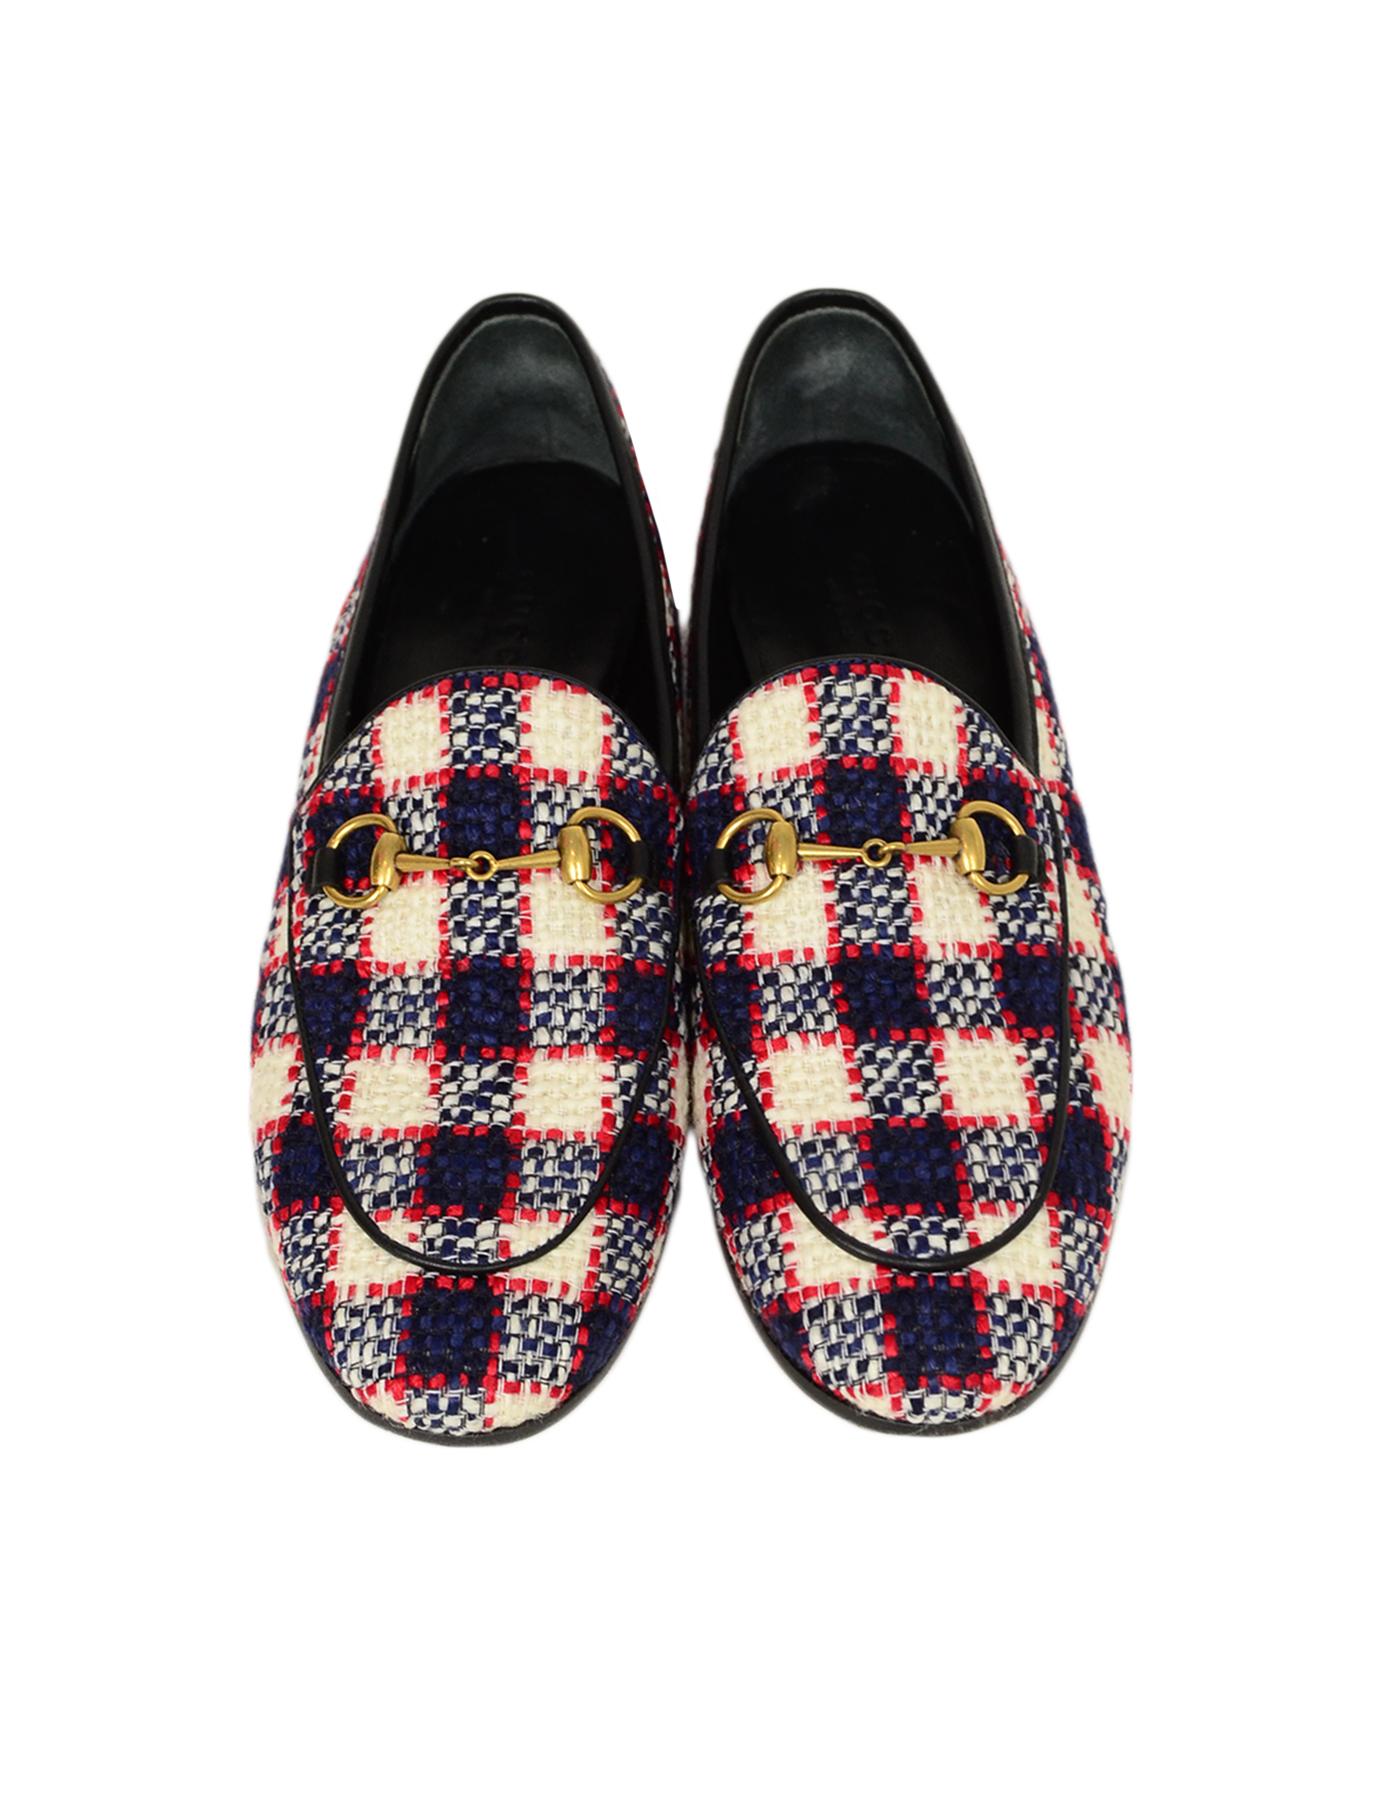 gucci tweed loafers